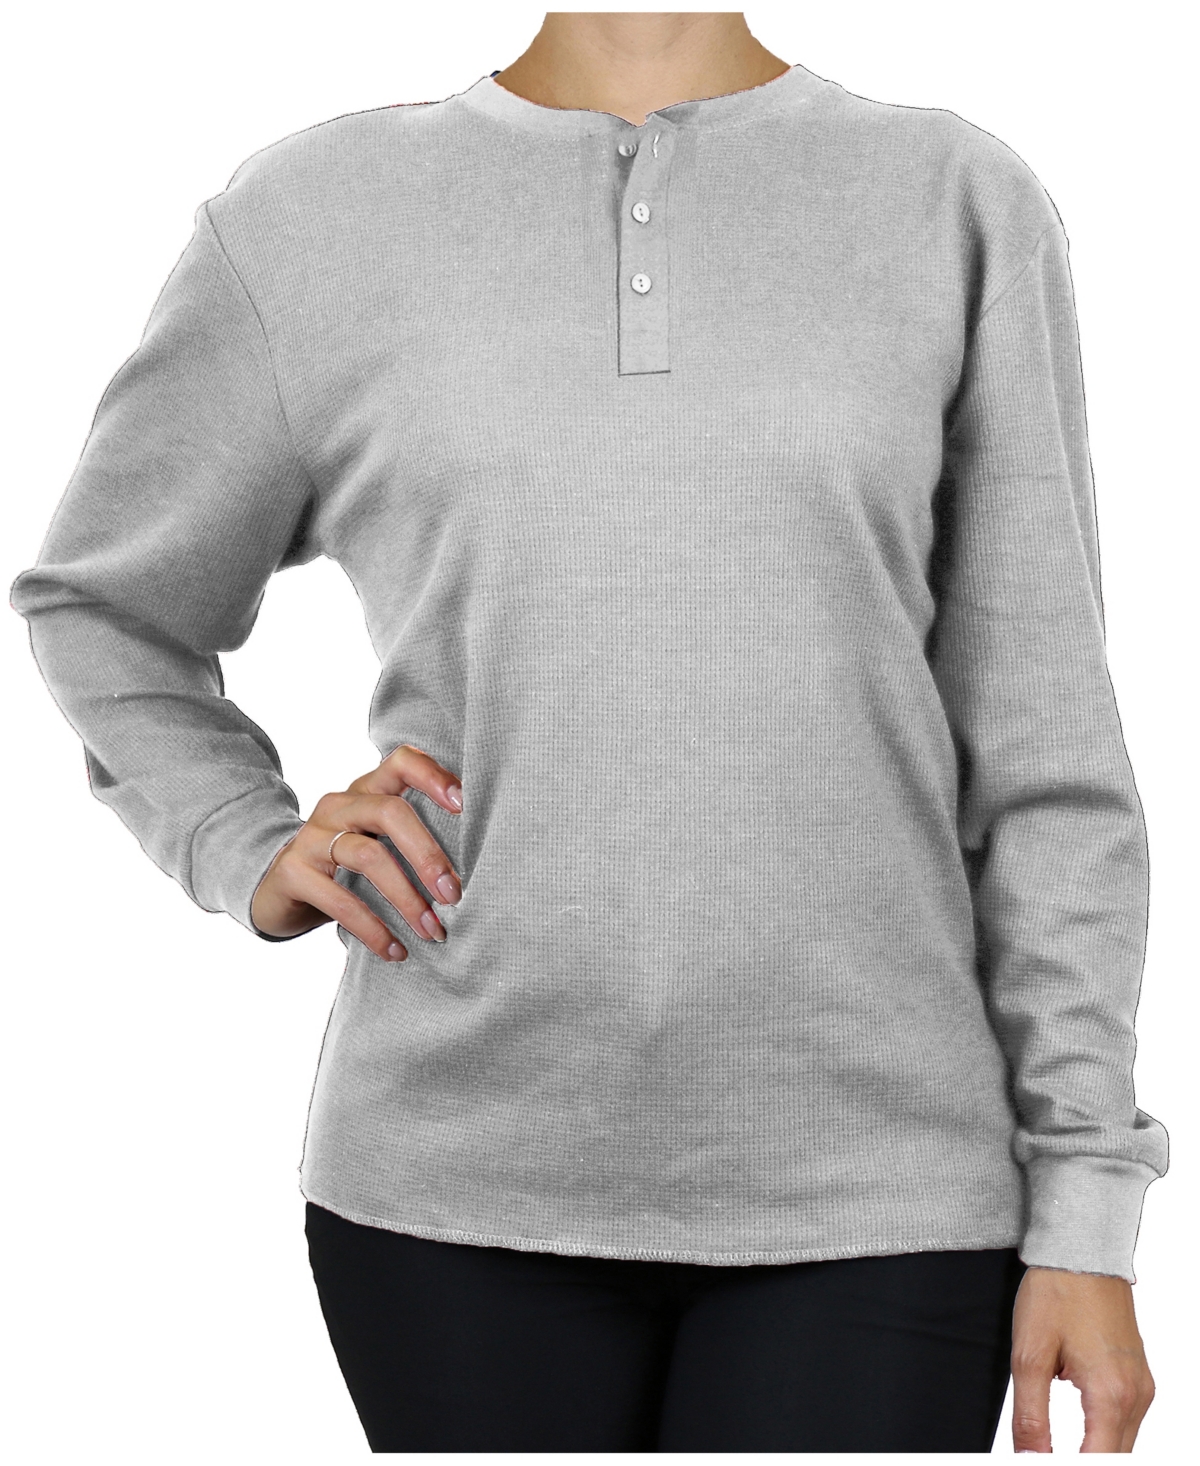 Women's Oversize Loose Fitting Waffle-Knit Henley Thermal Sweater - White